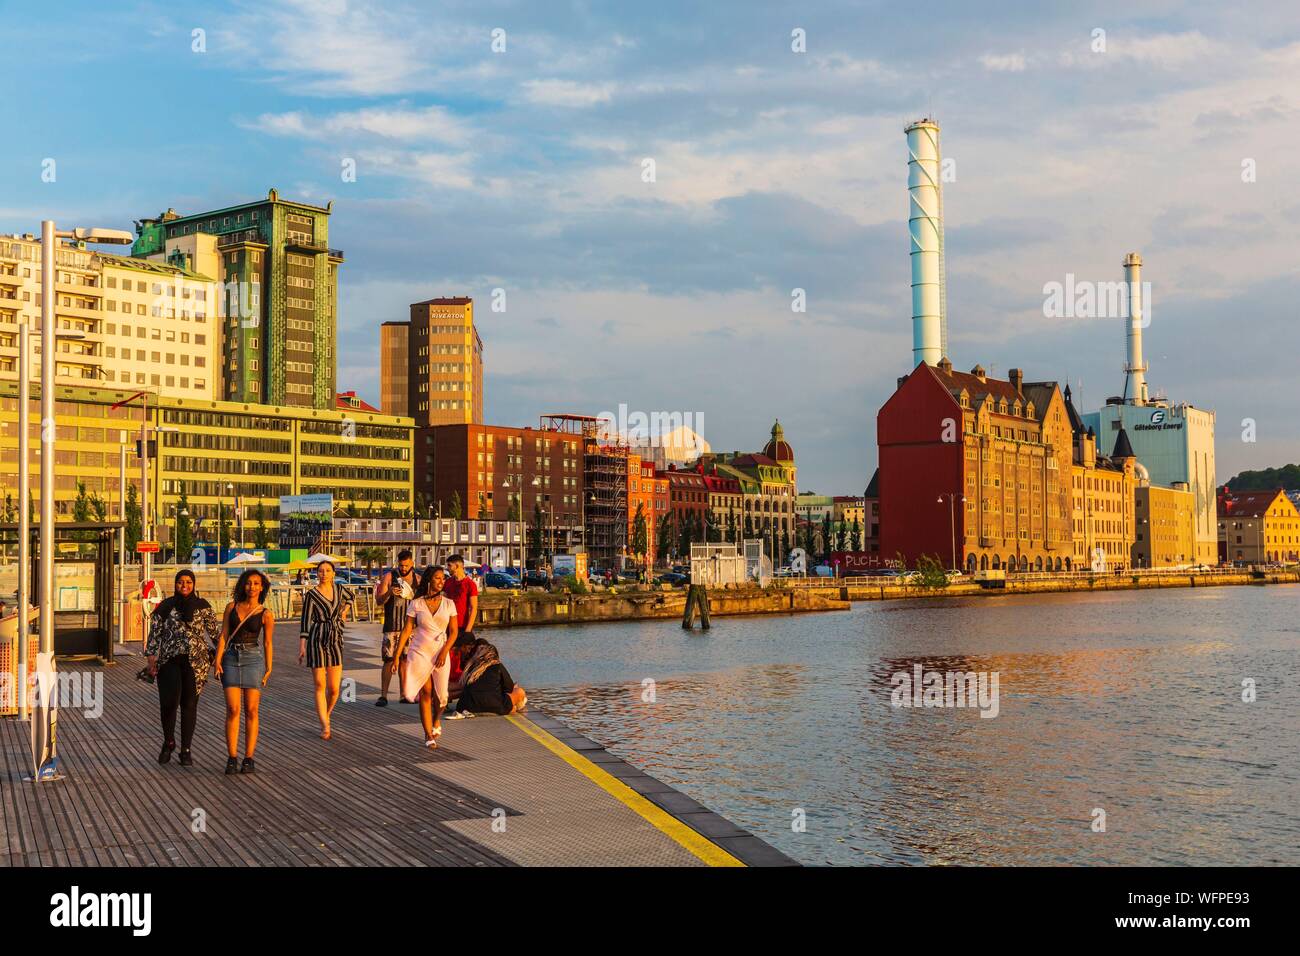 Sweden, Vastra Gotaland, Goteborg (Gothenburg), view of the thermal power plant of the city from the dock of Stenpiren Stock Photo